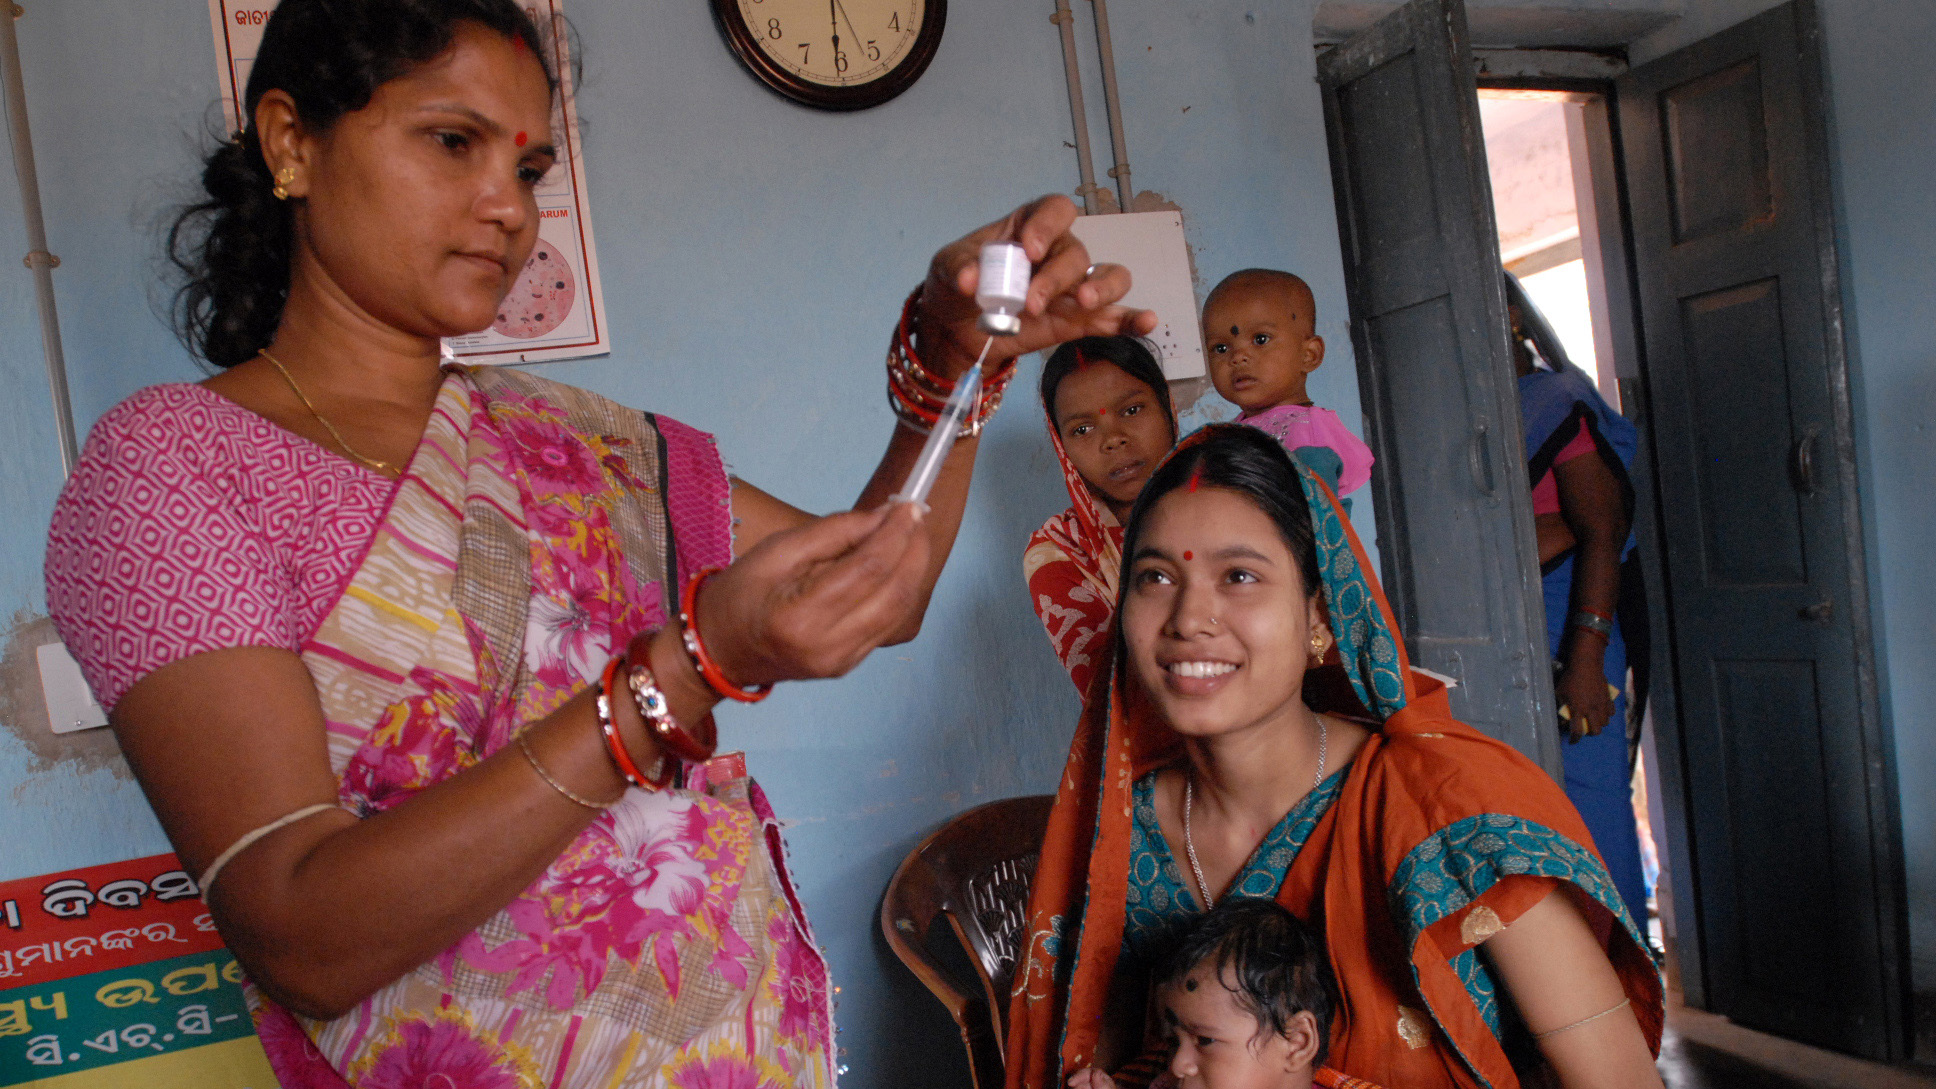 India’s gender gap is slowing the vaccination drive